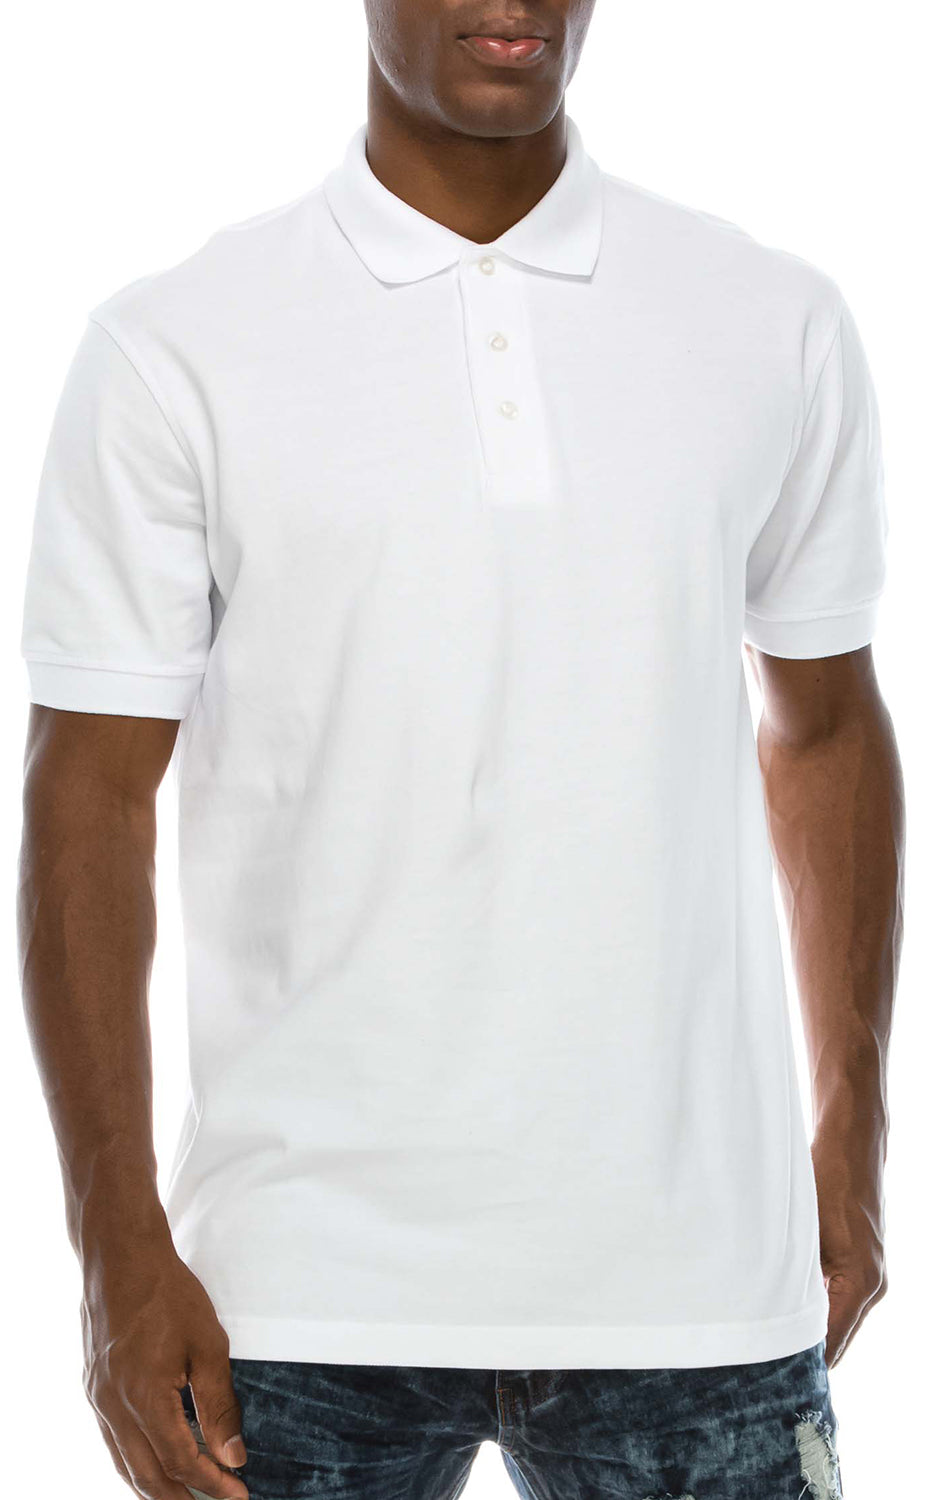 Experience timeless elegance with the Pro 5 Classic Polo White Shirt. Boasting a classic three-button placket, it's available in sizes from S to 5X. Choose from Black, White, Navy, and more. Made from 100% Cotton fabric for unparalleled comfort and style.